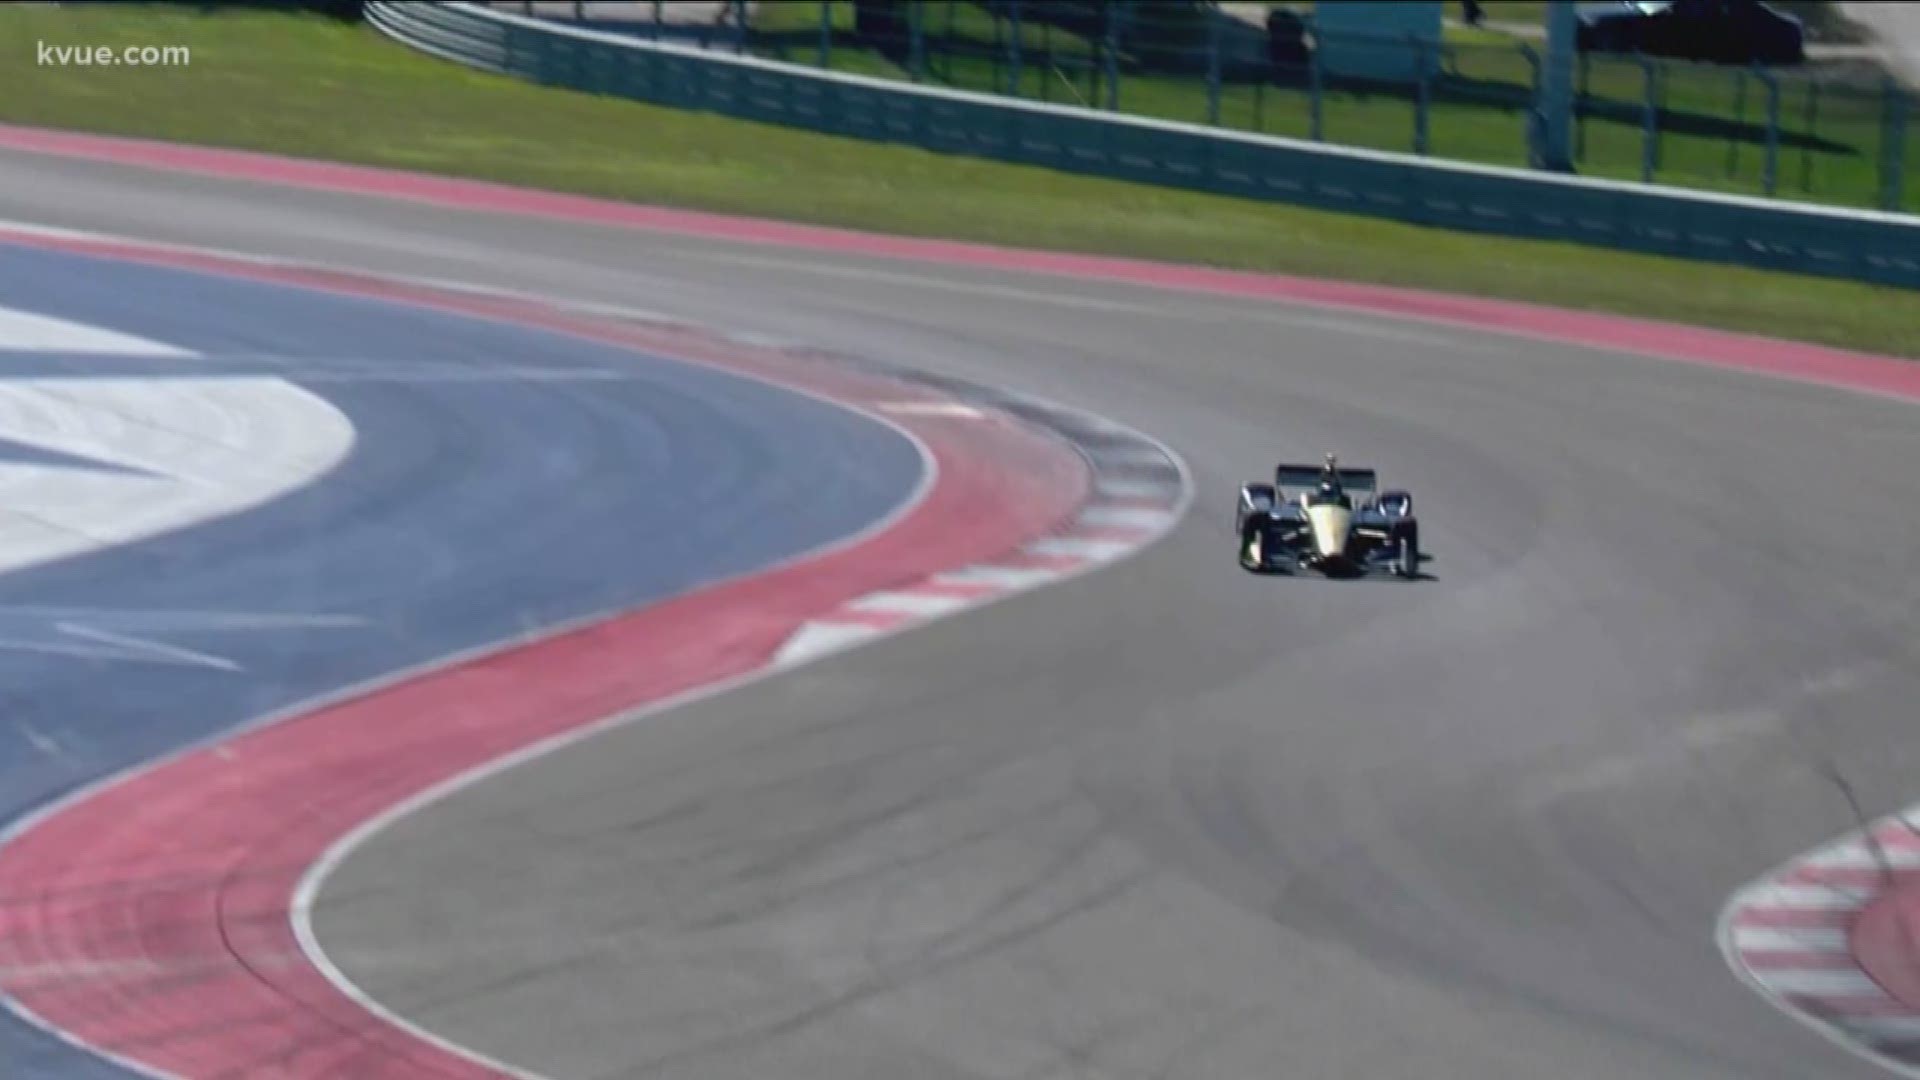 One of the biggest racing championships in North America comes to Central Texas this weekend. KVUE's Jay Wallis joins us live from COTA with what you can expect!